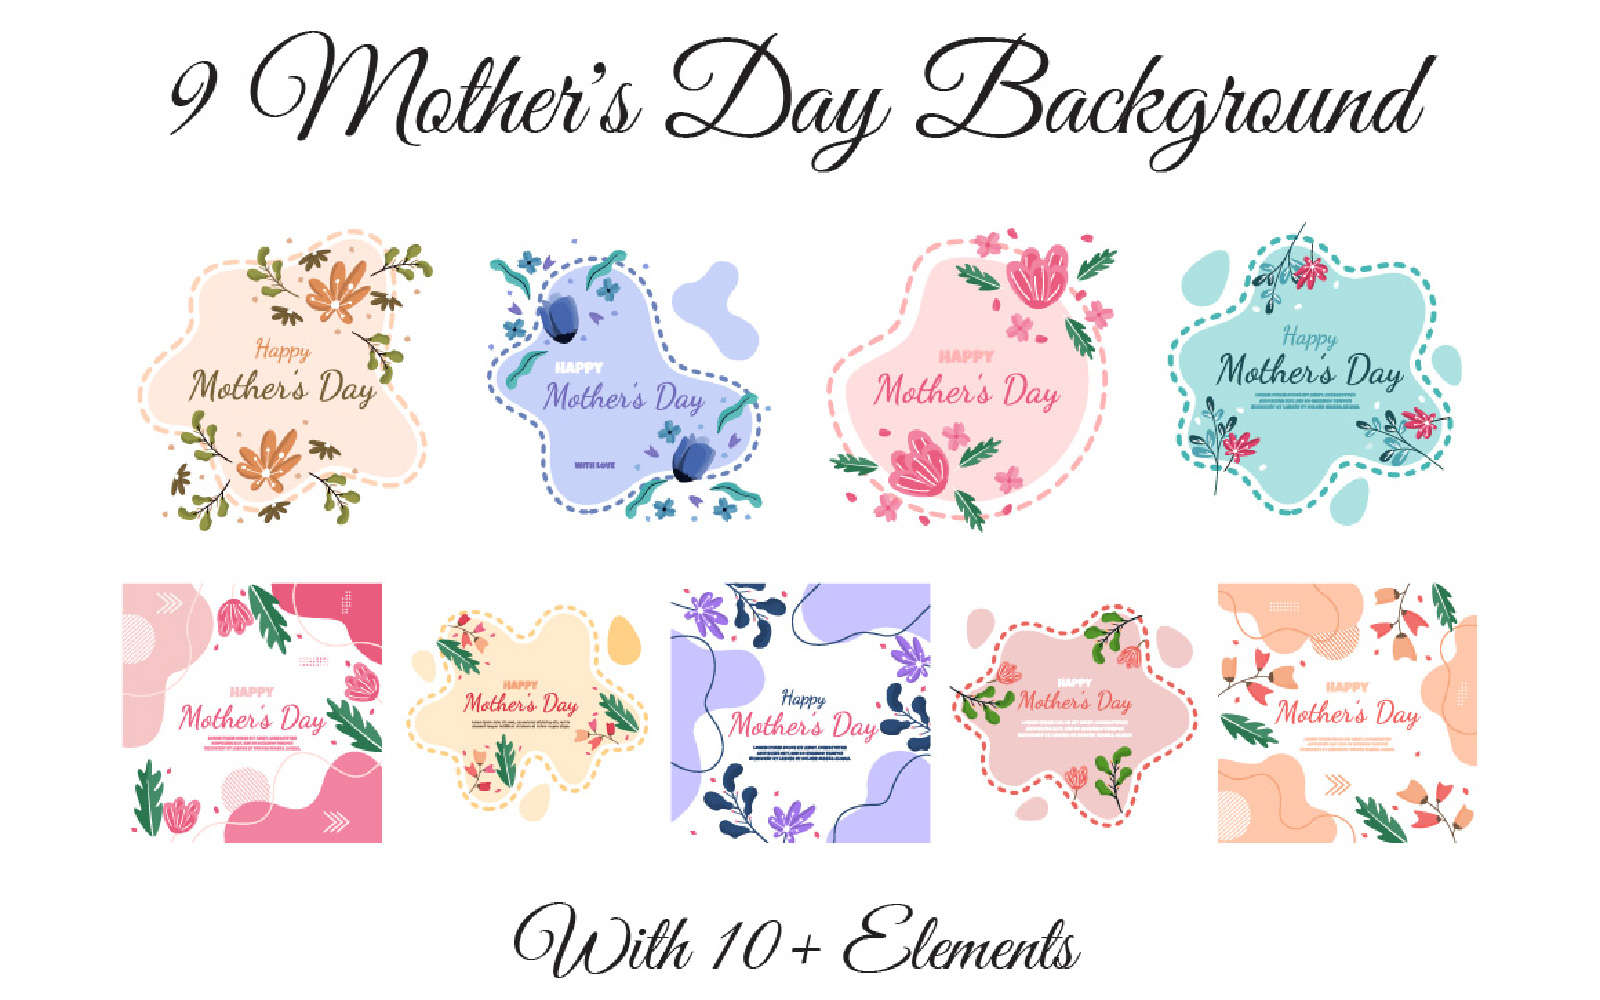 9 Mother's Day Background with 10+ Elements